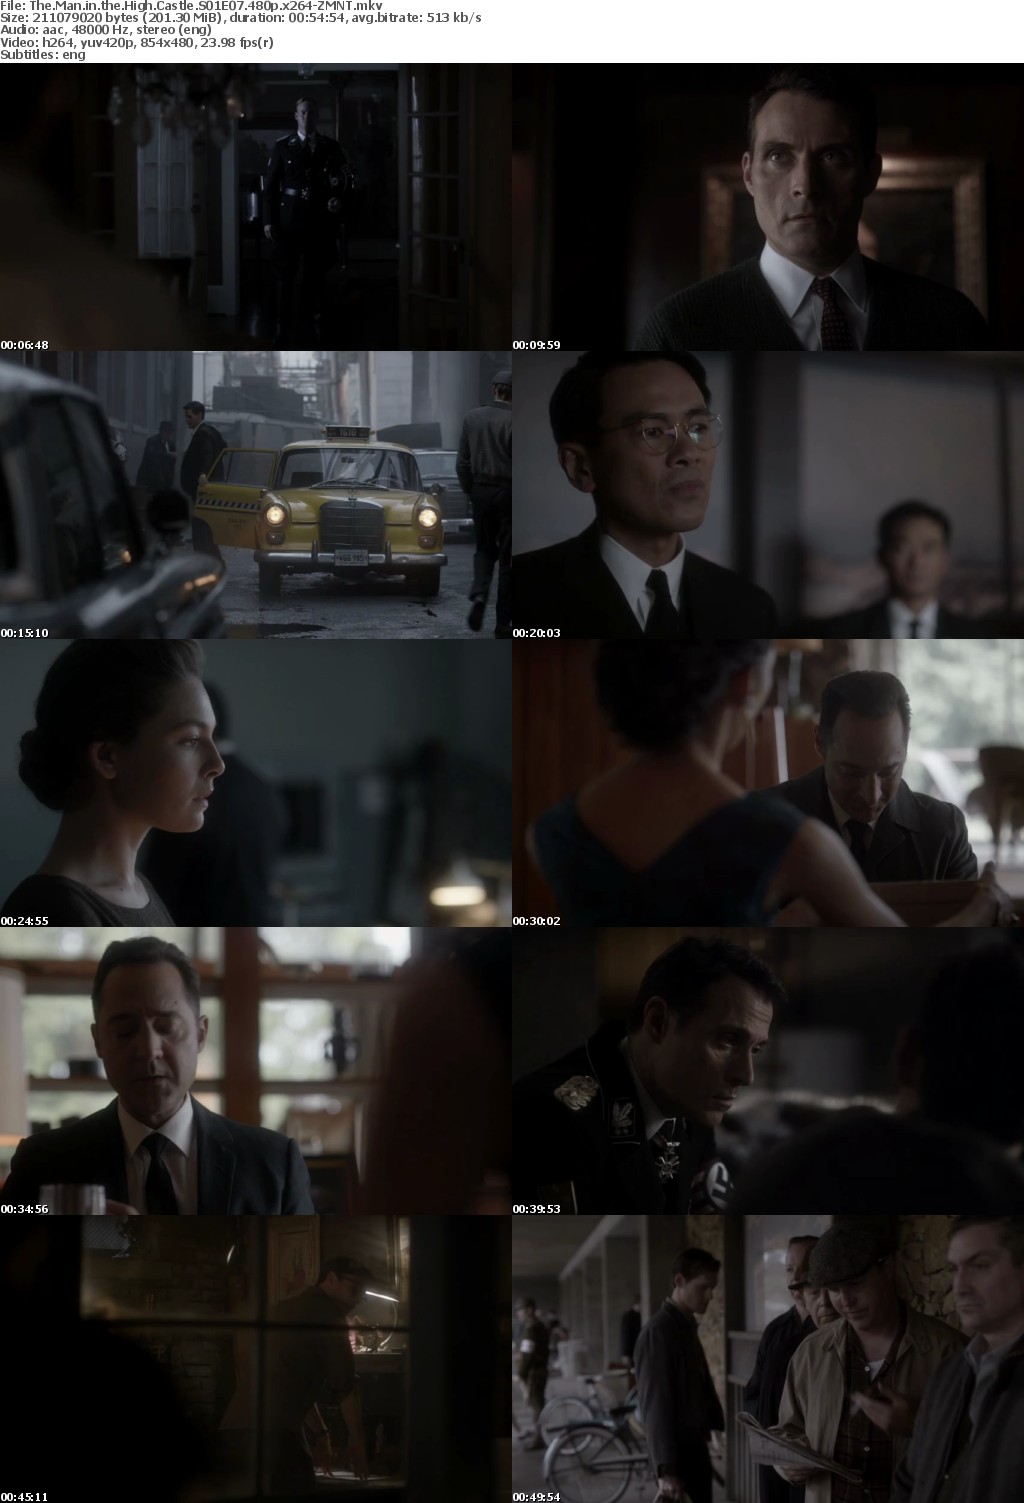 The Man in the High Castle S01 480p x264-ZMNT